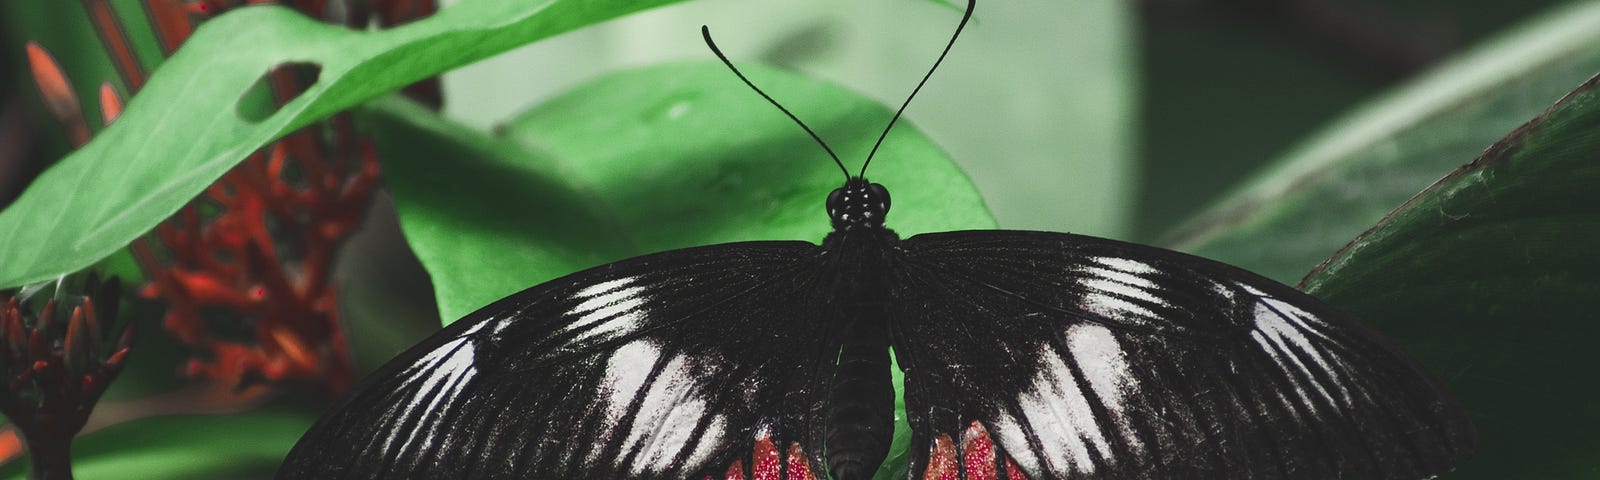 Black, white, and red butterfly with a damaged right lower wing.